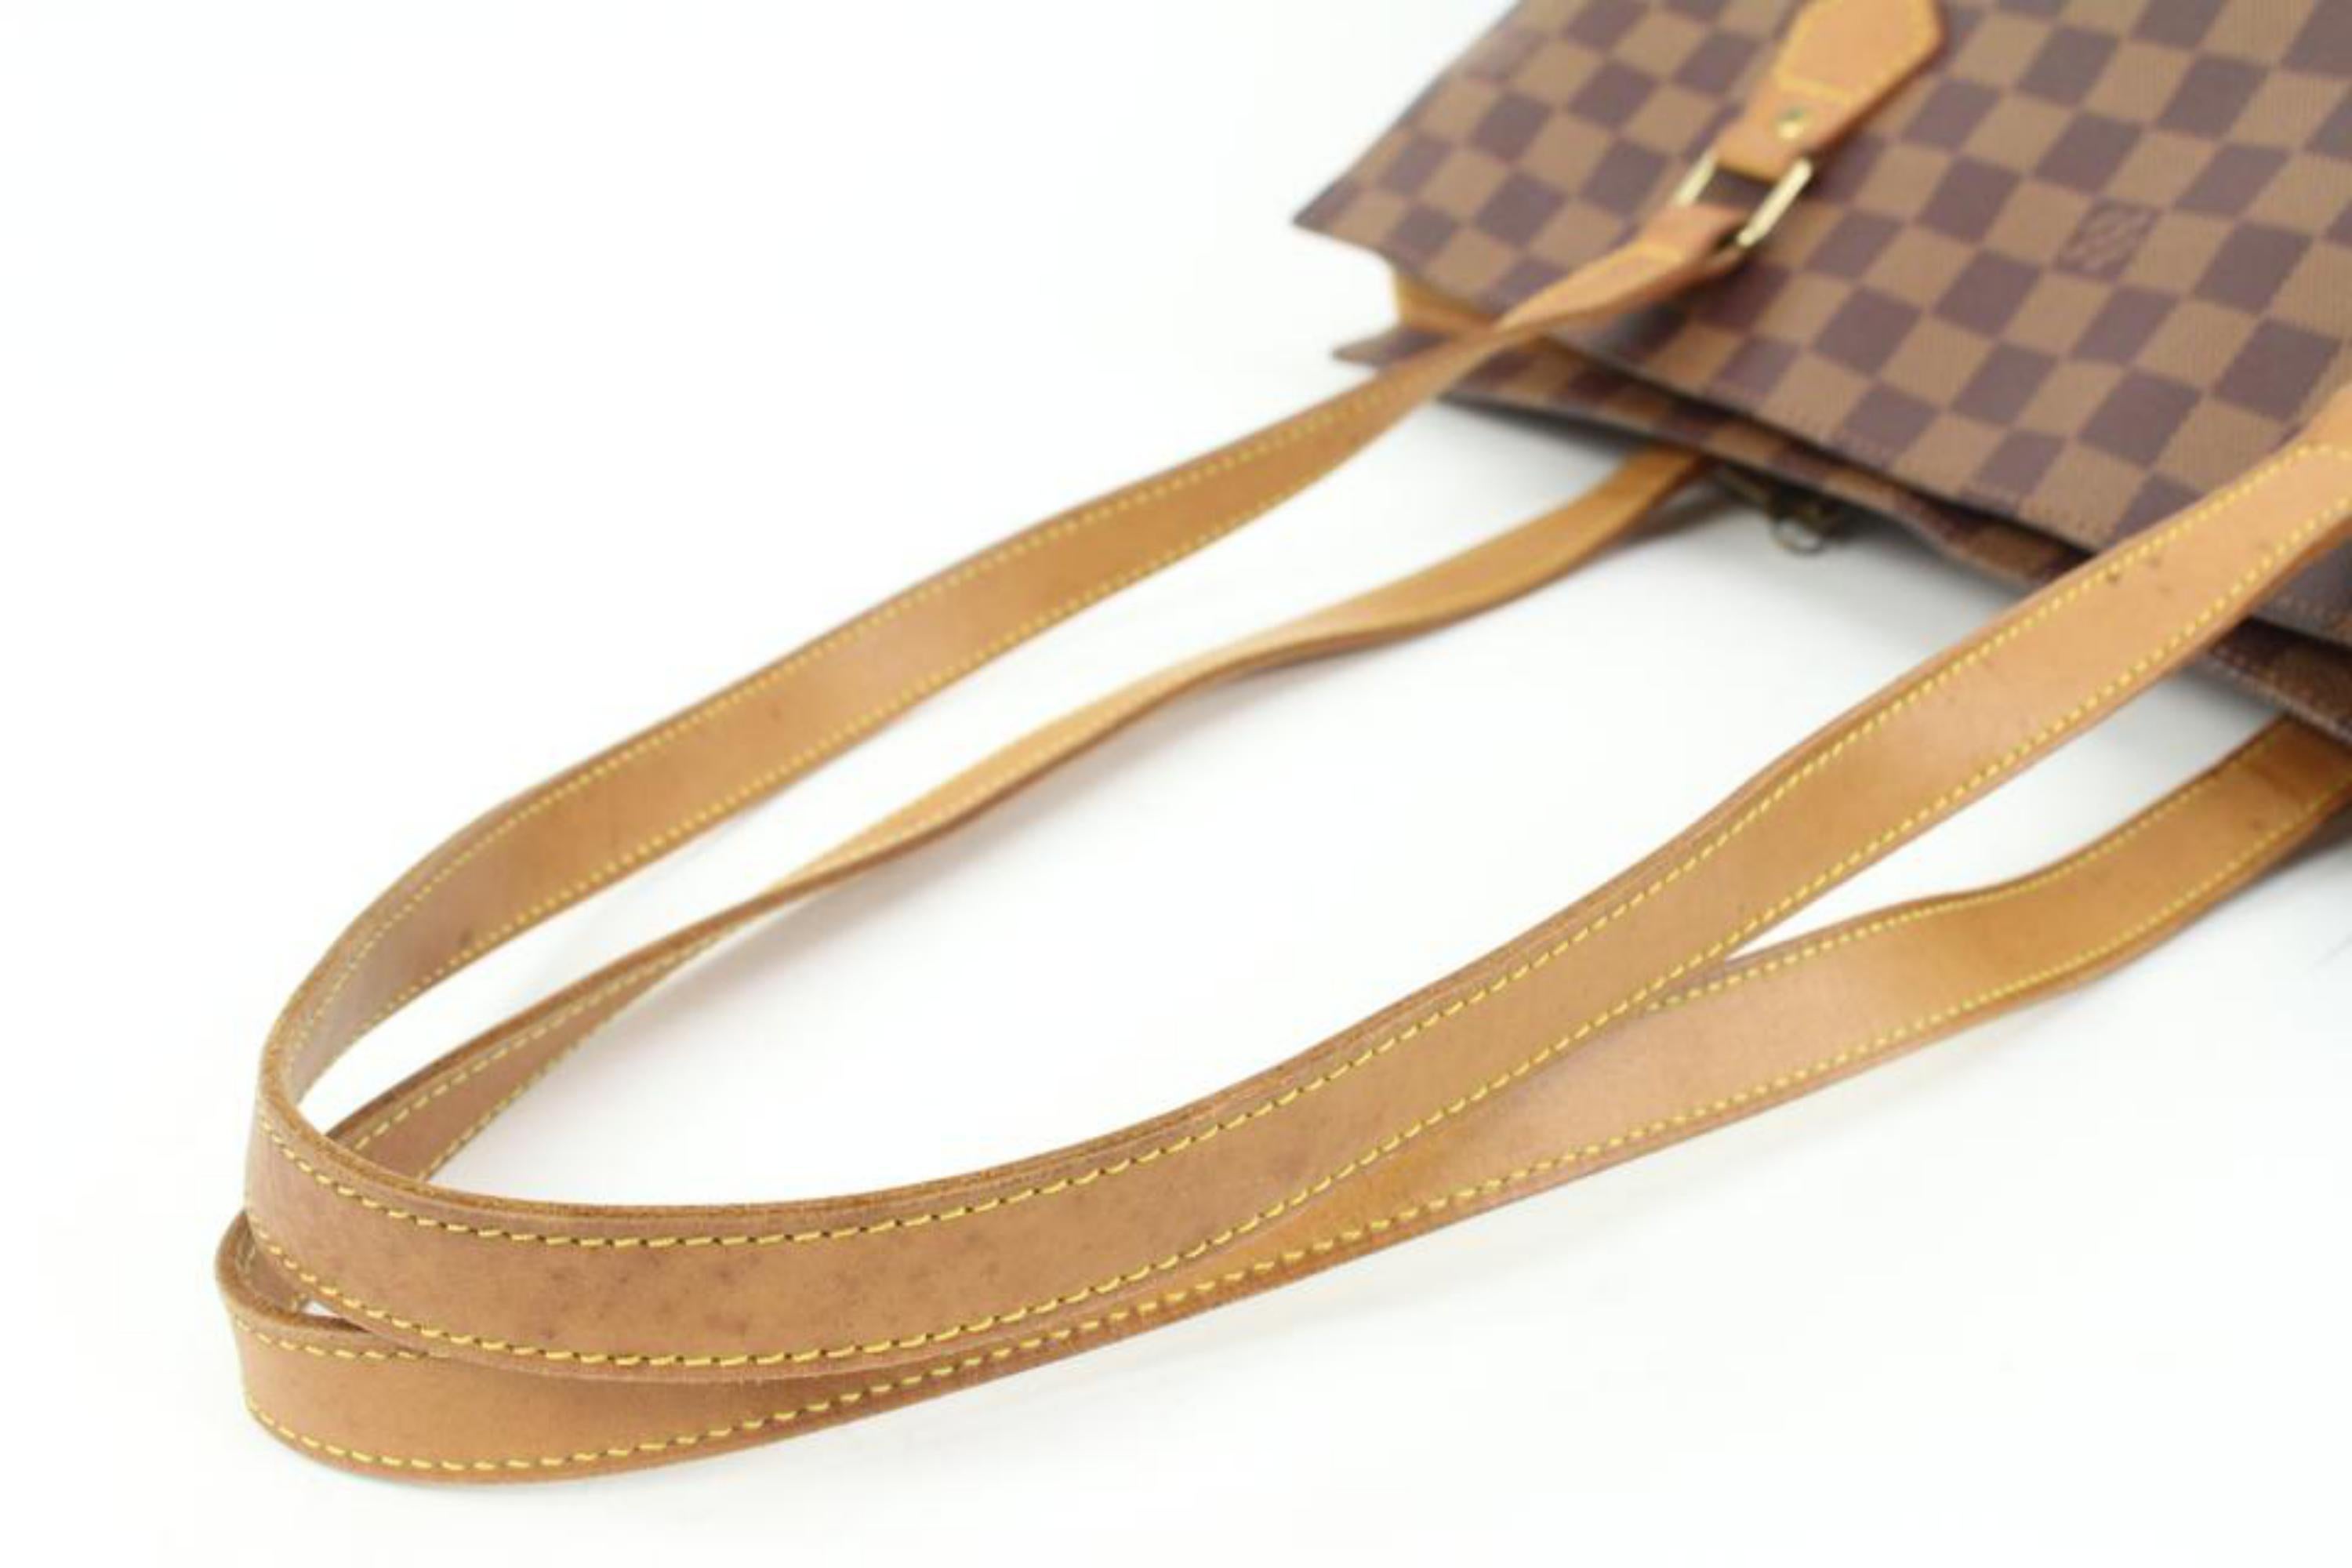 Louis Vuitton Limited Edition Centenaire Damier Columbine Zip Shoulder Bag 64lv3 In Good Condition For Sale In Dix hills, NY